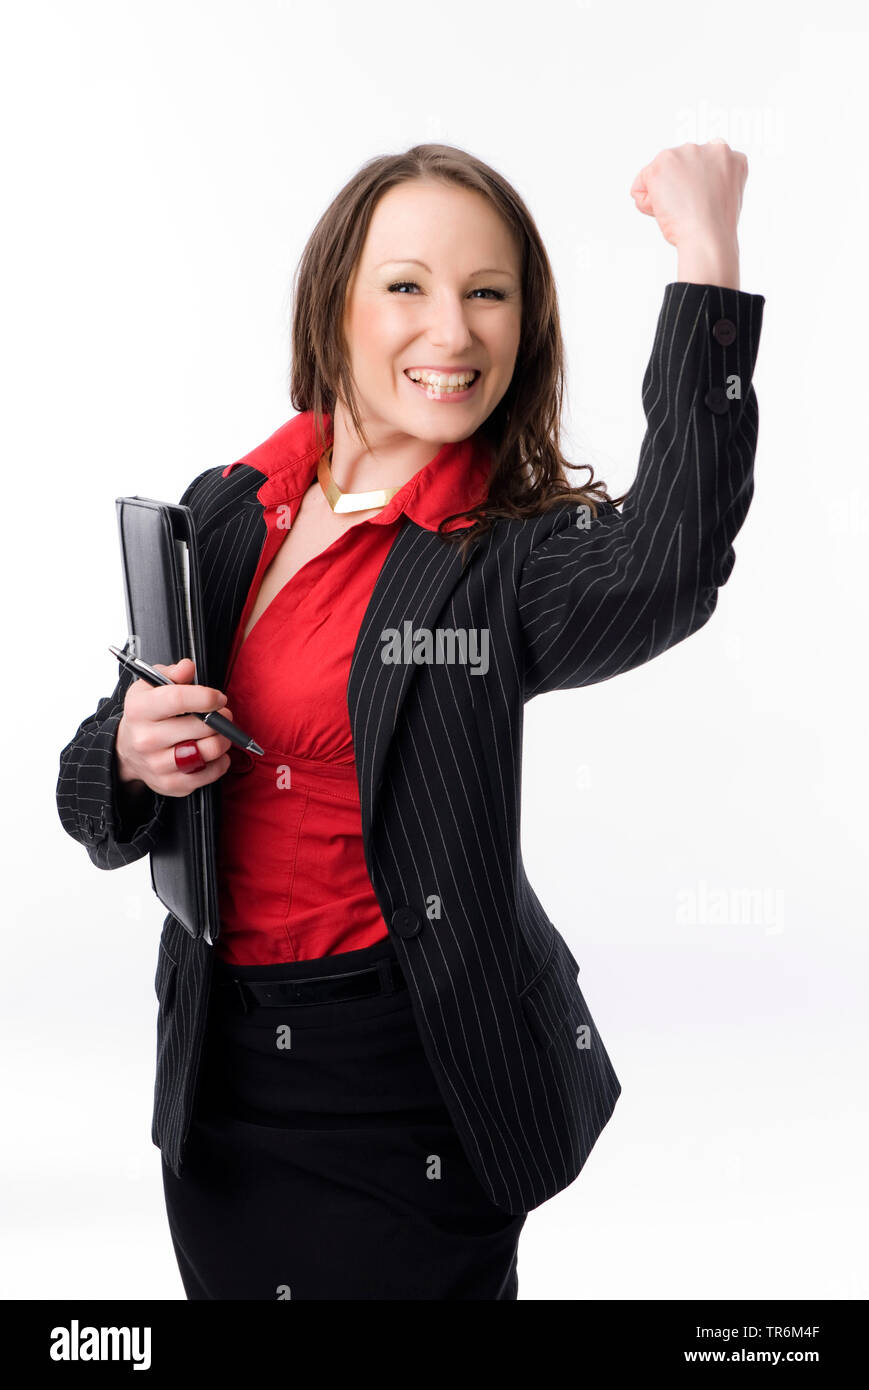 Successful Business Woman With Clenched Fist Stock Photo Alamy